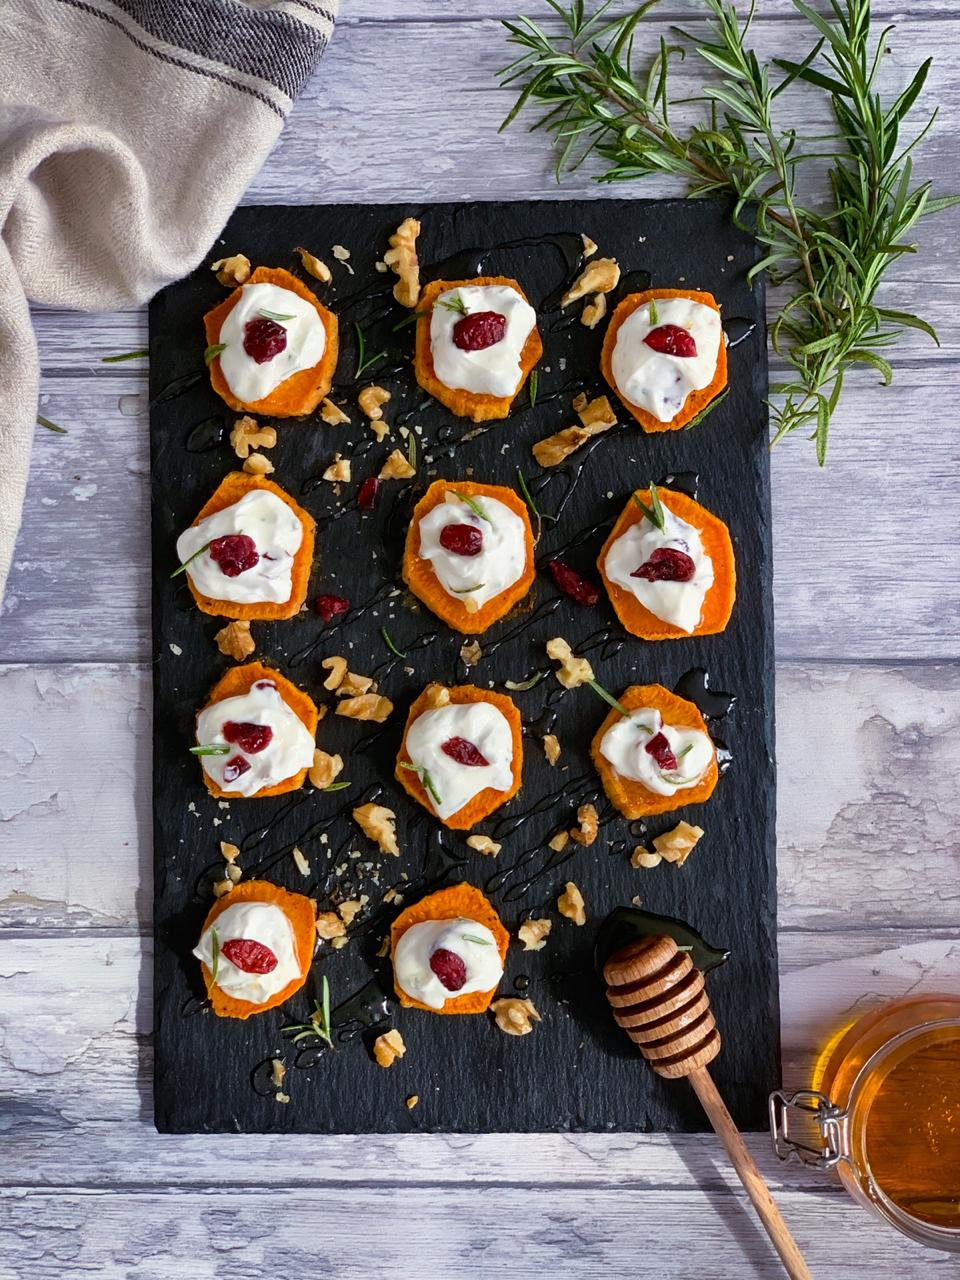 SWEET POTATO WITH GOAT CHEESE